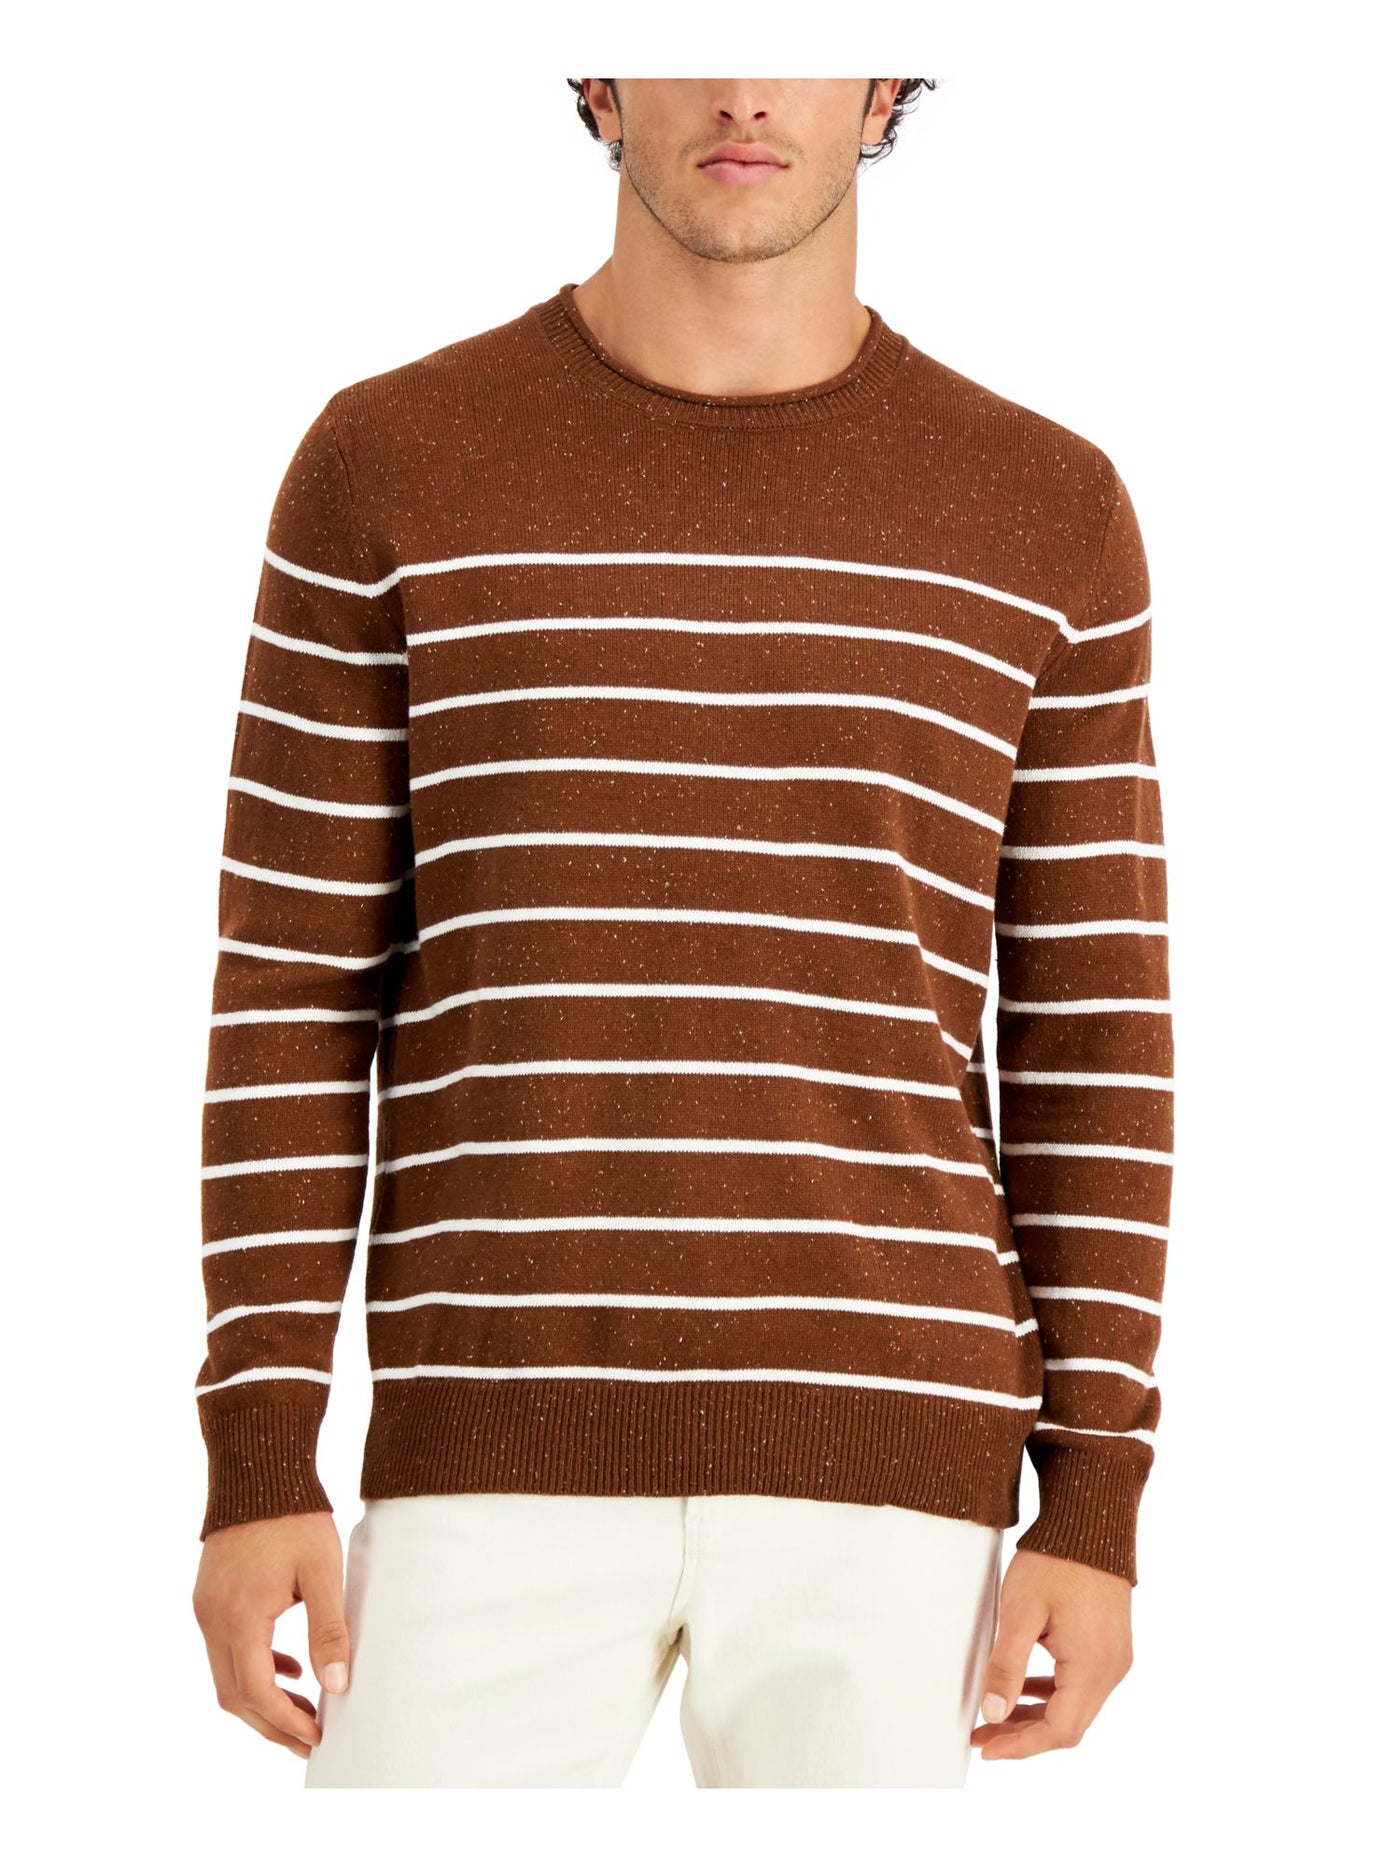 CLUBROOM Mens Gregor Brown Striped Crew Neck Classic Fit Pullover Sweater XL